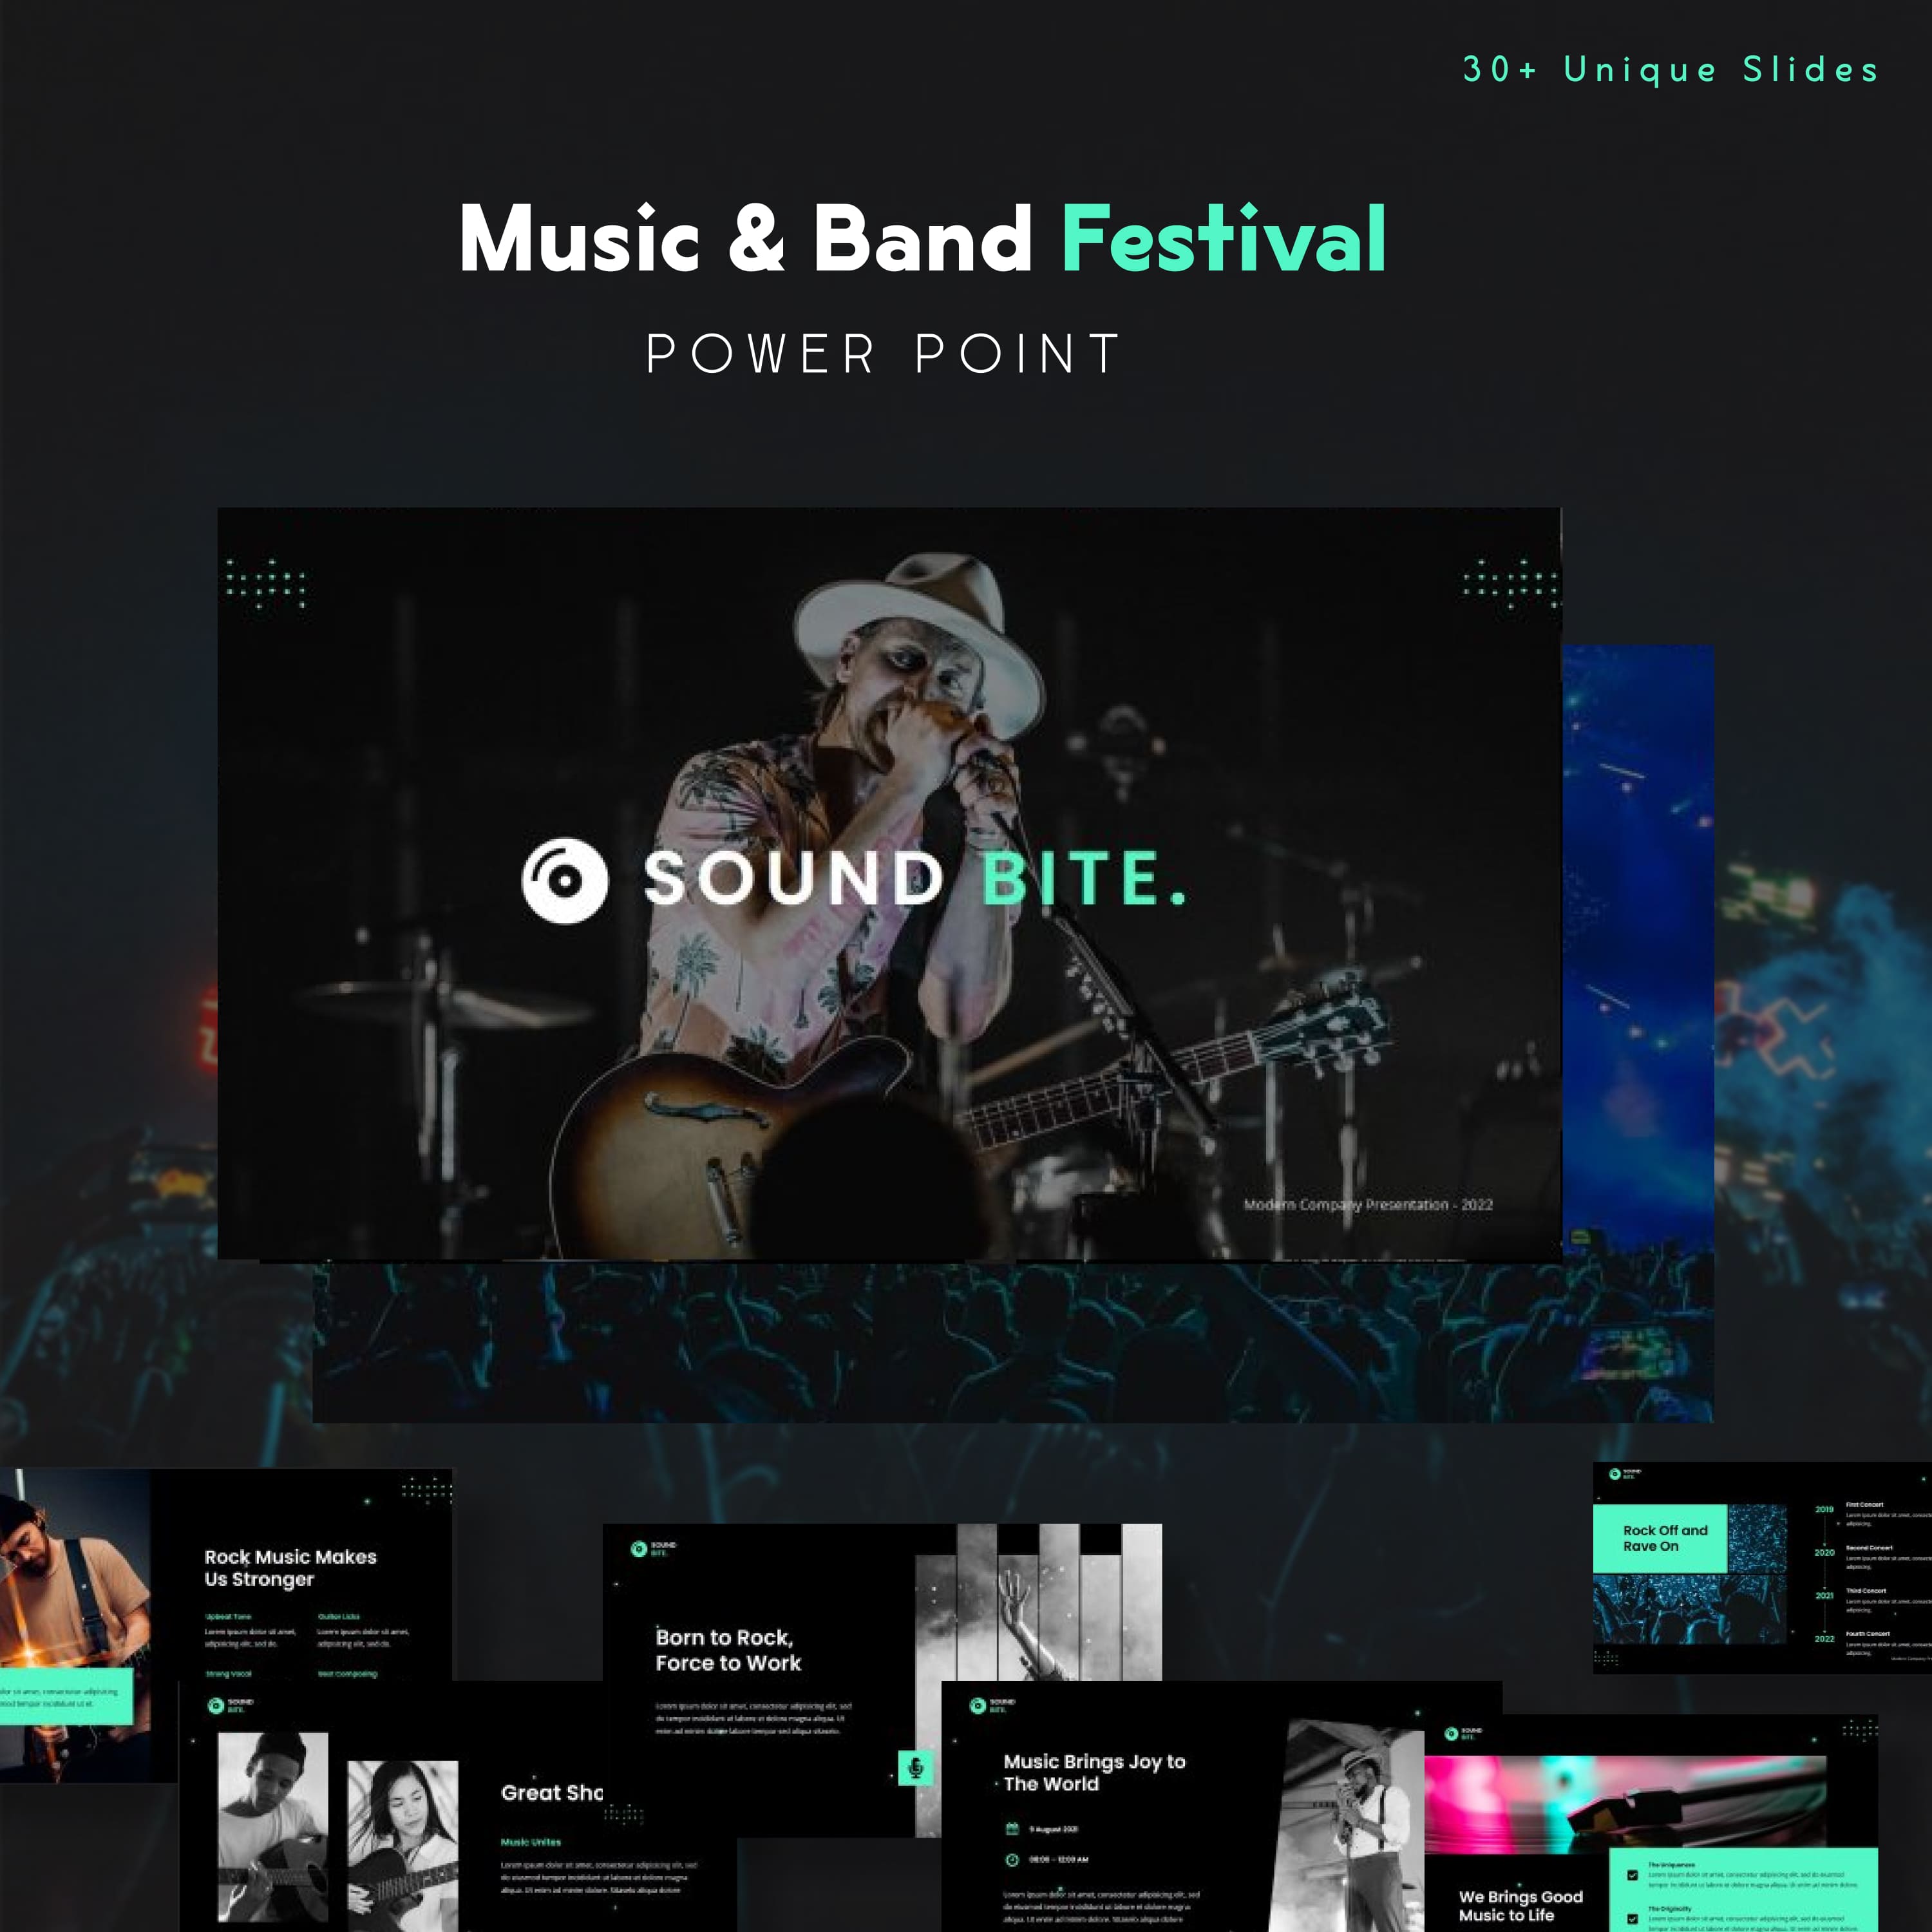 Music & Band Festival PowerPoint cover.